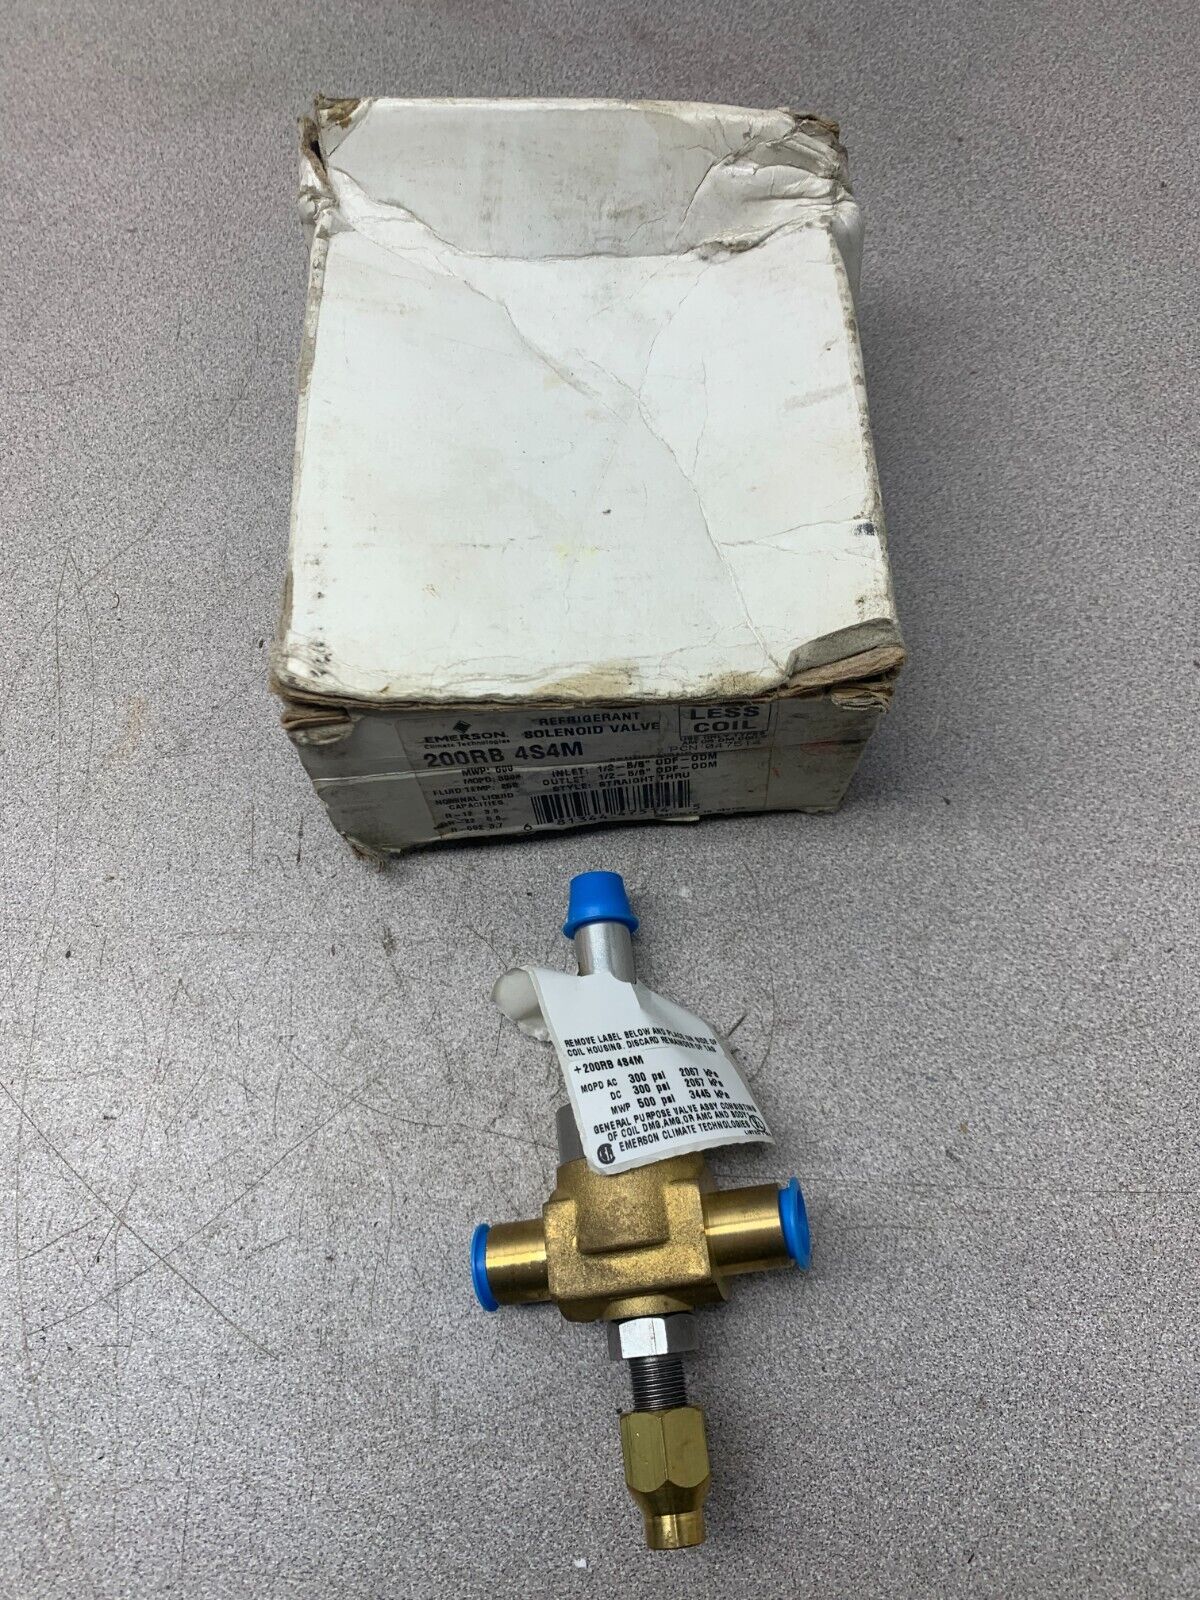 NEW IN BOX EMERSON REFRIGERANT SOLENOID VALVE *LESS COIL* 200RB 4S4M